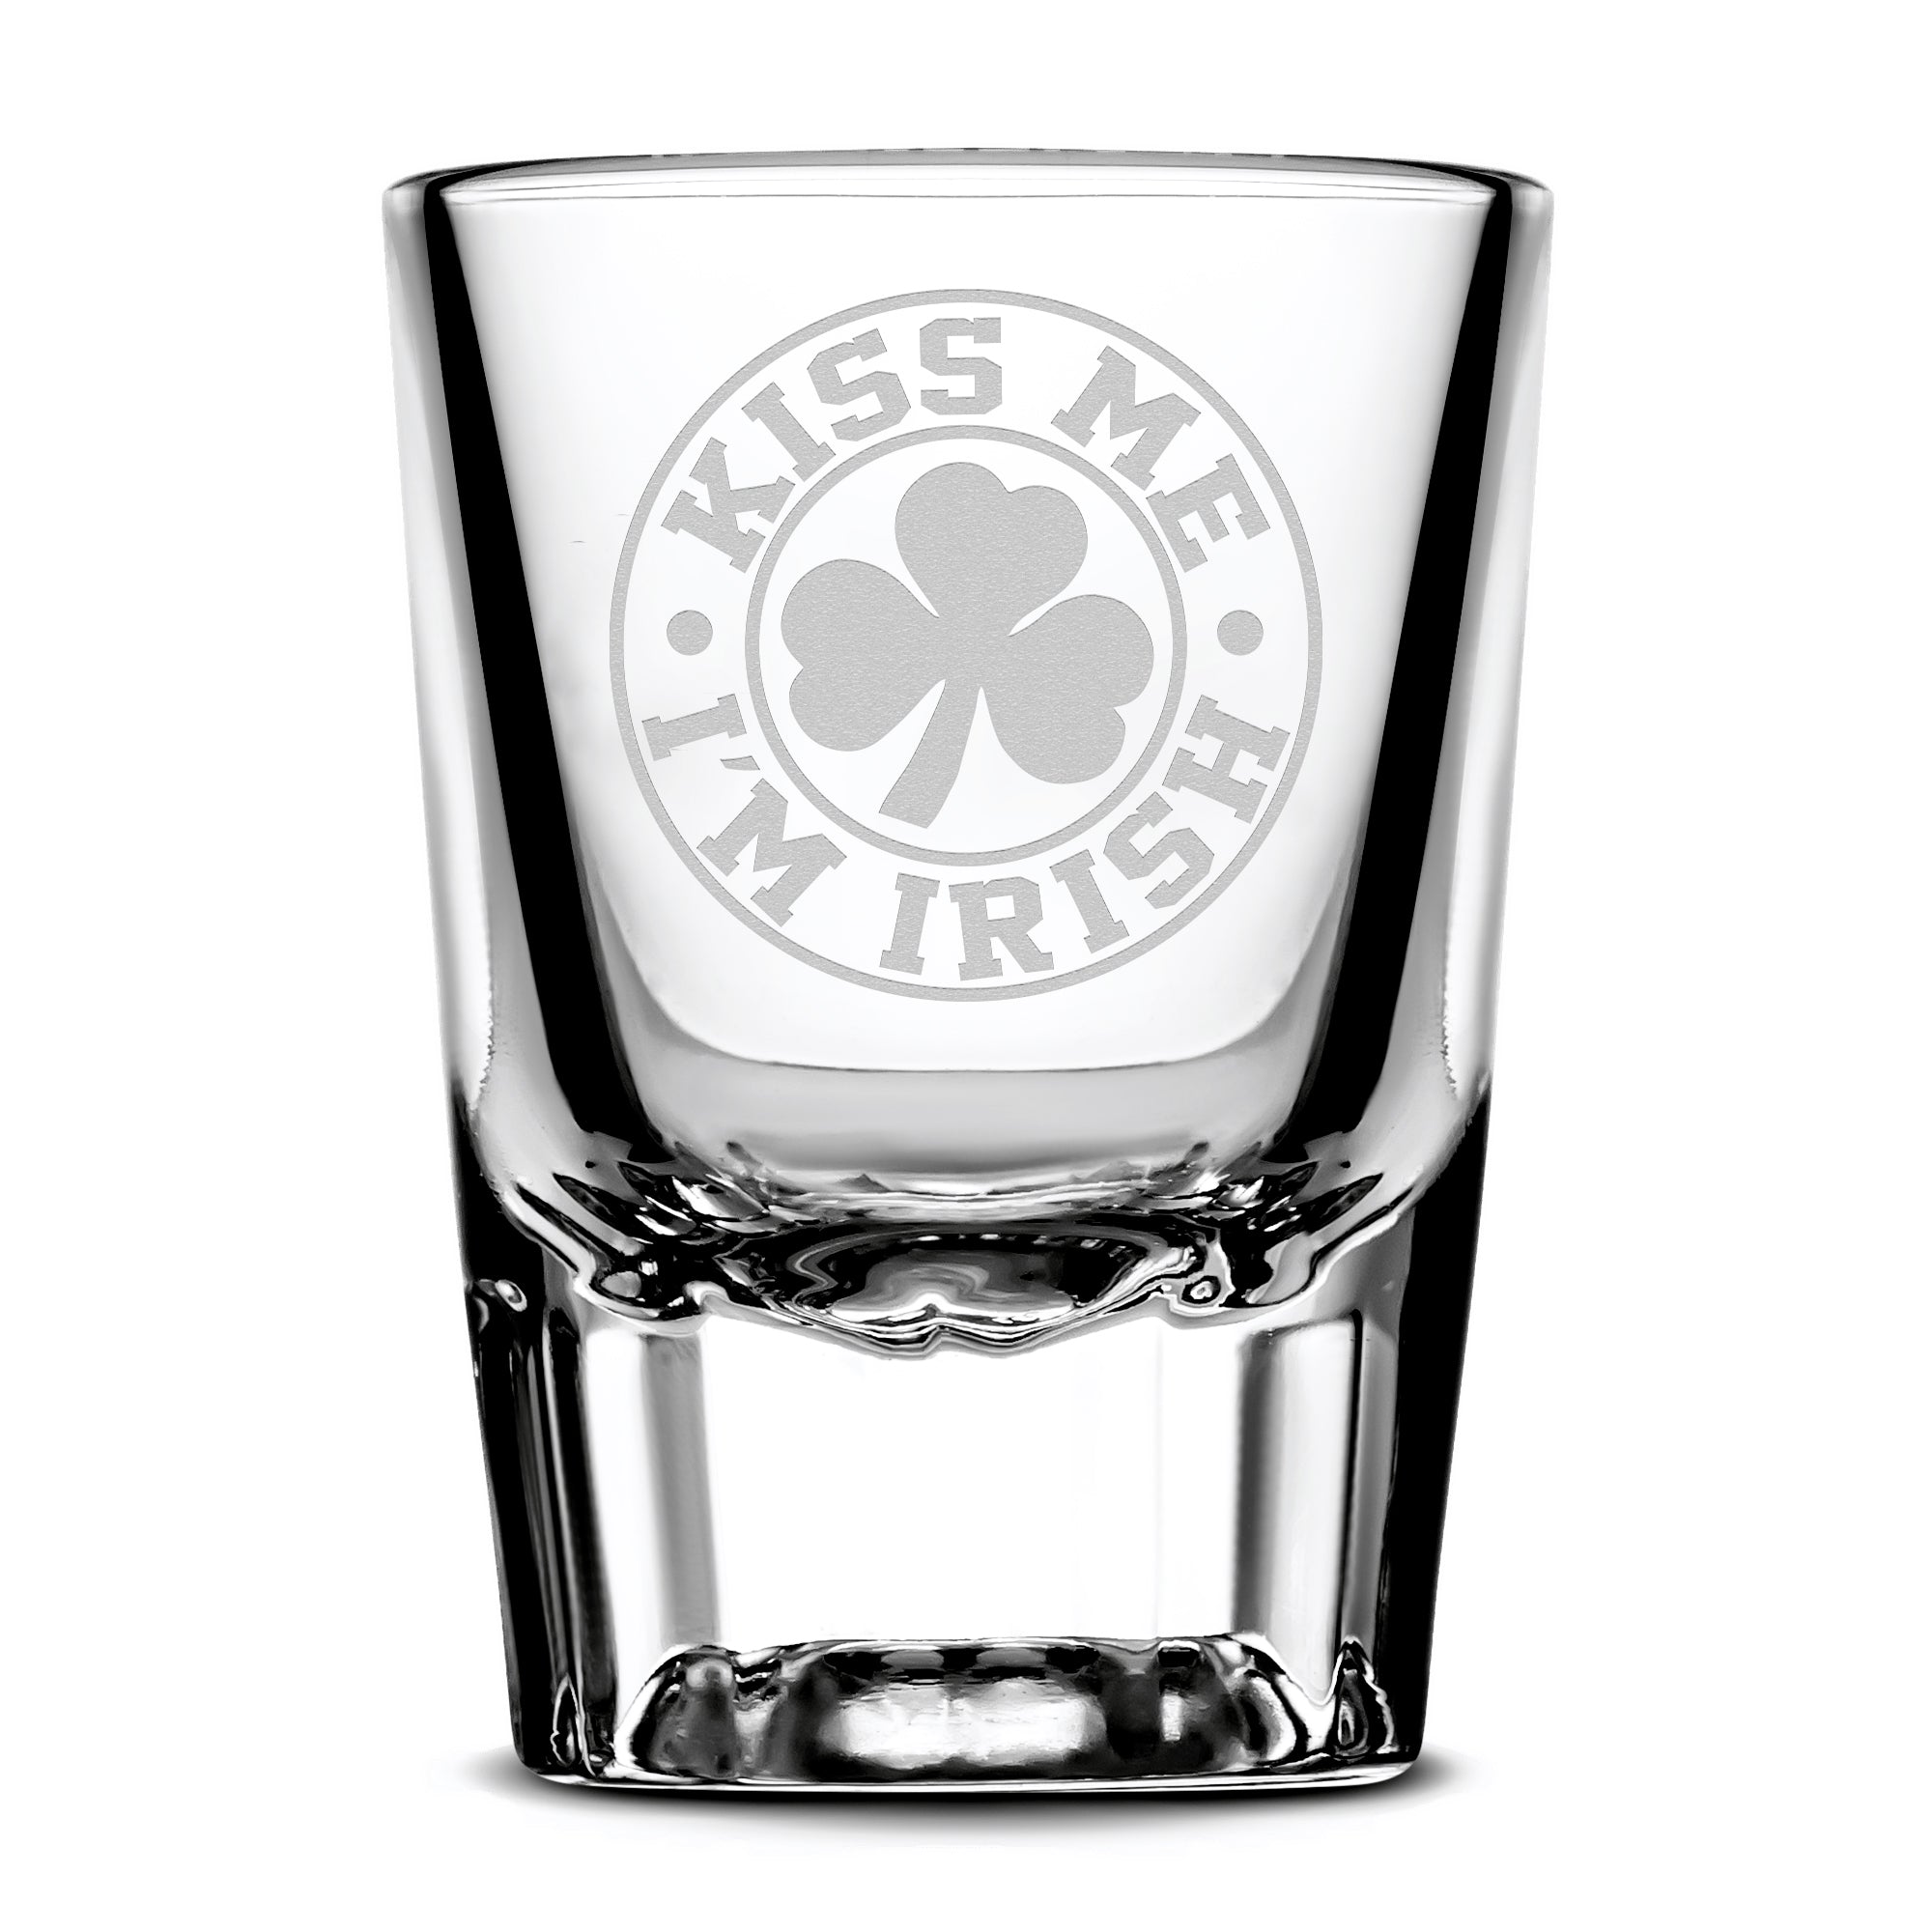 Premium Etched Shot Glass, Kiss Me I'm Irish, 2oz, Laser Etched or Hand Etched